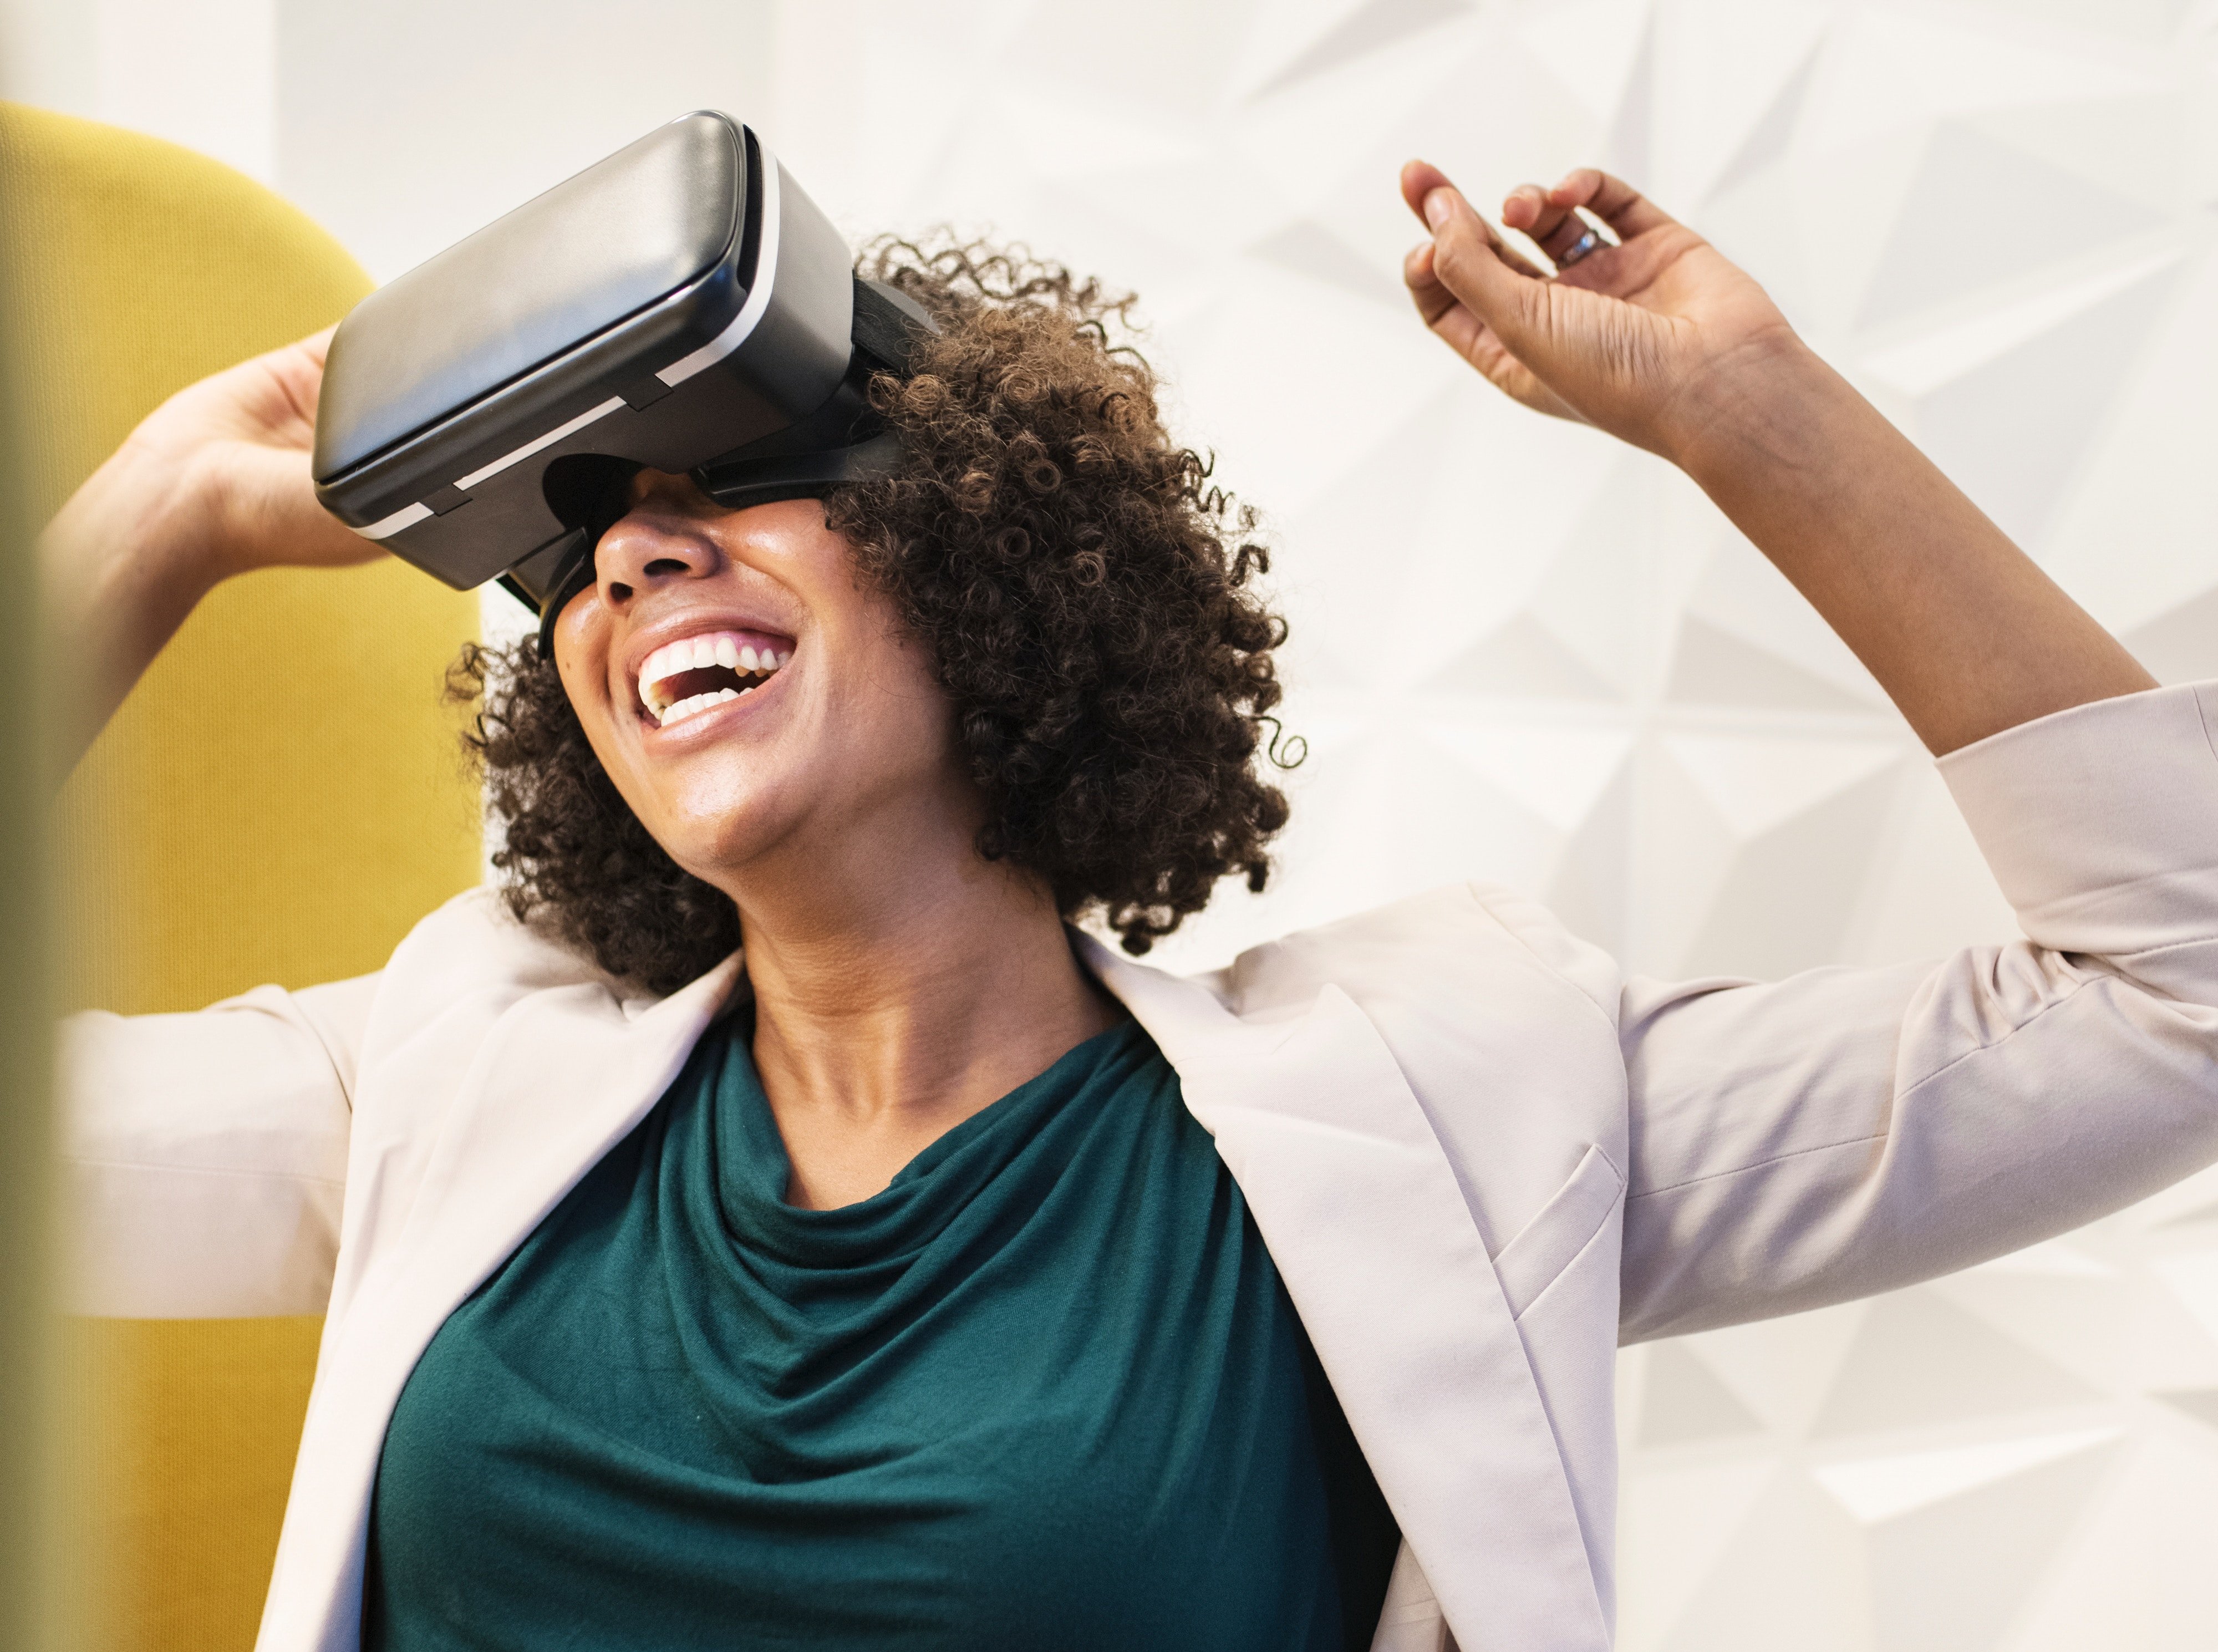 Here's Why 2019 is the Year of Virtual Reality